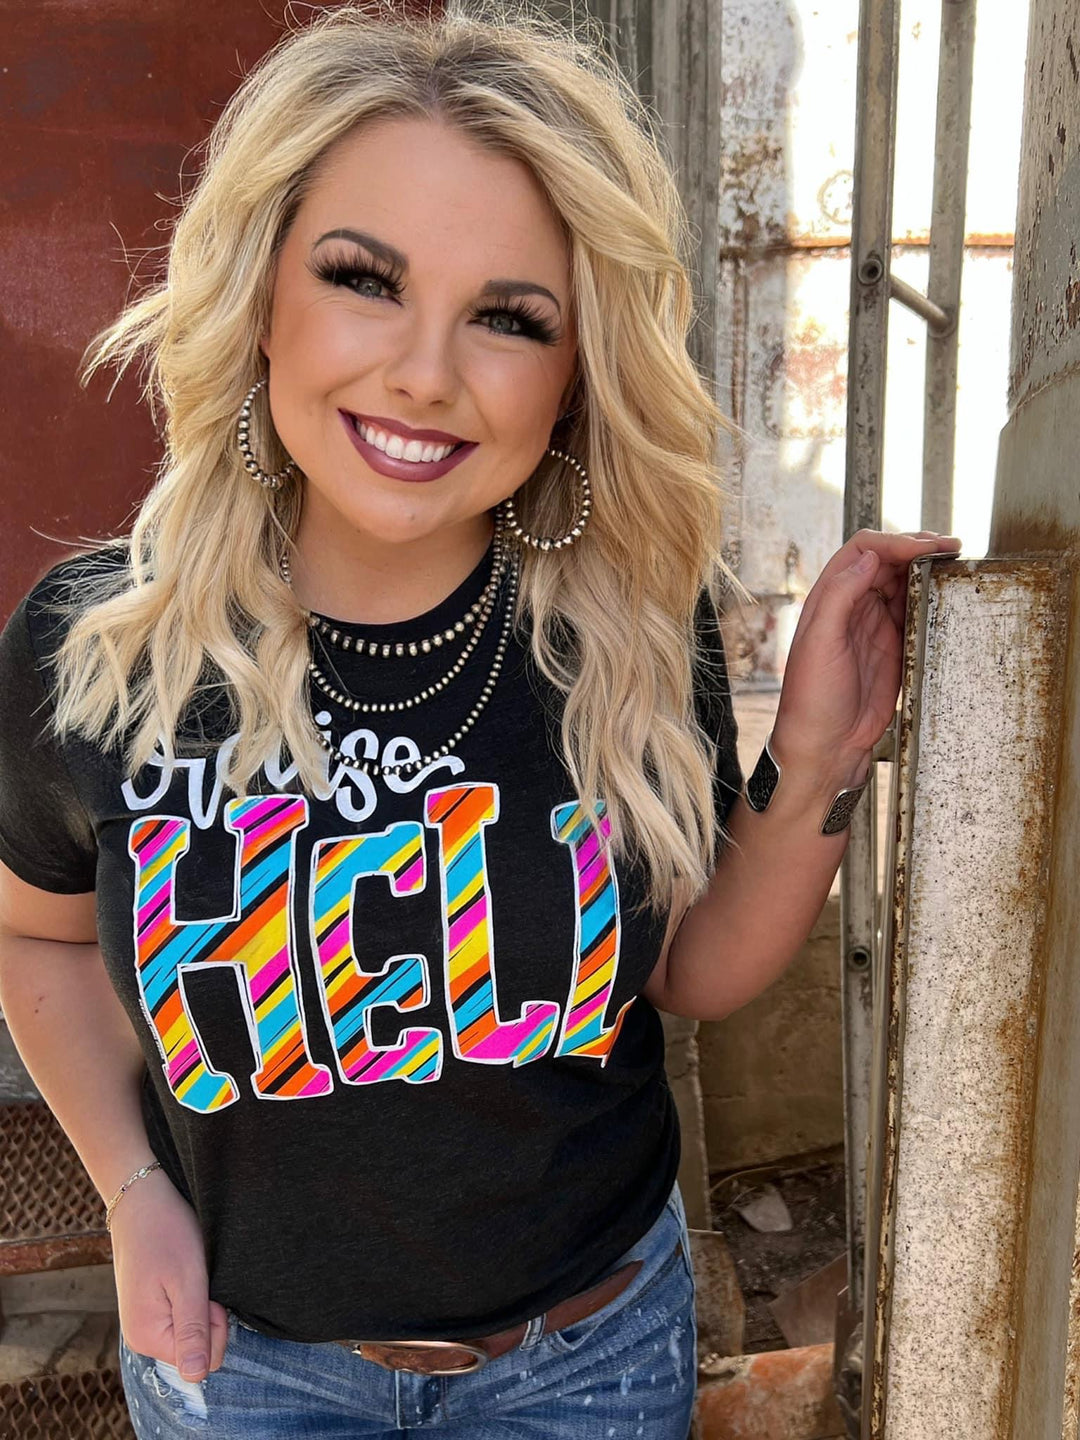 Raise Hell Charblack Graphic Tee by Texas True Threads